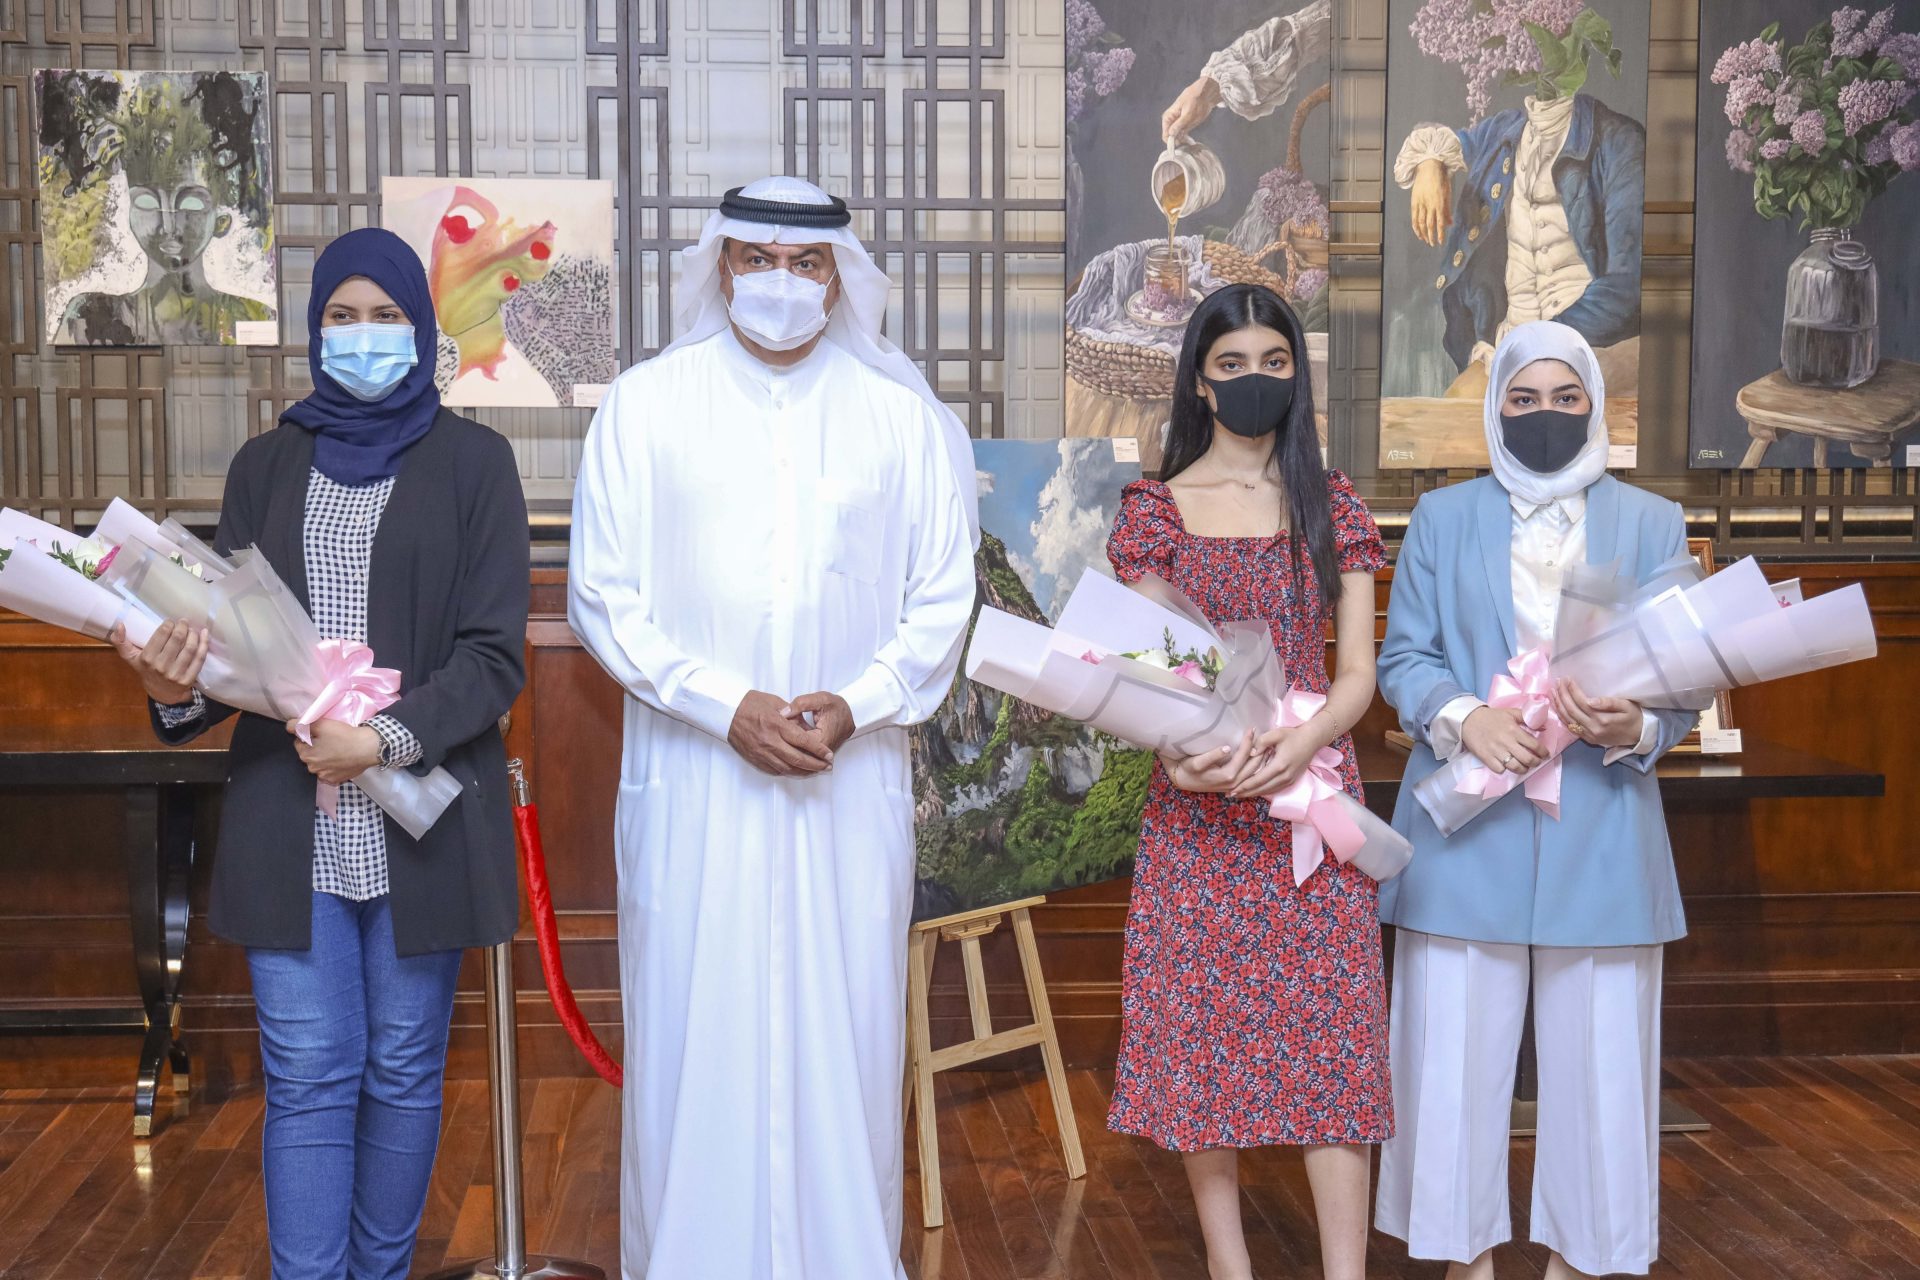 InterContinental Regency Bahrain supports local young Bahraini artists as part of IHG's ‘Giving for Good’ month